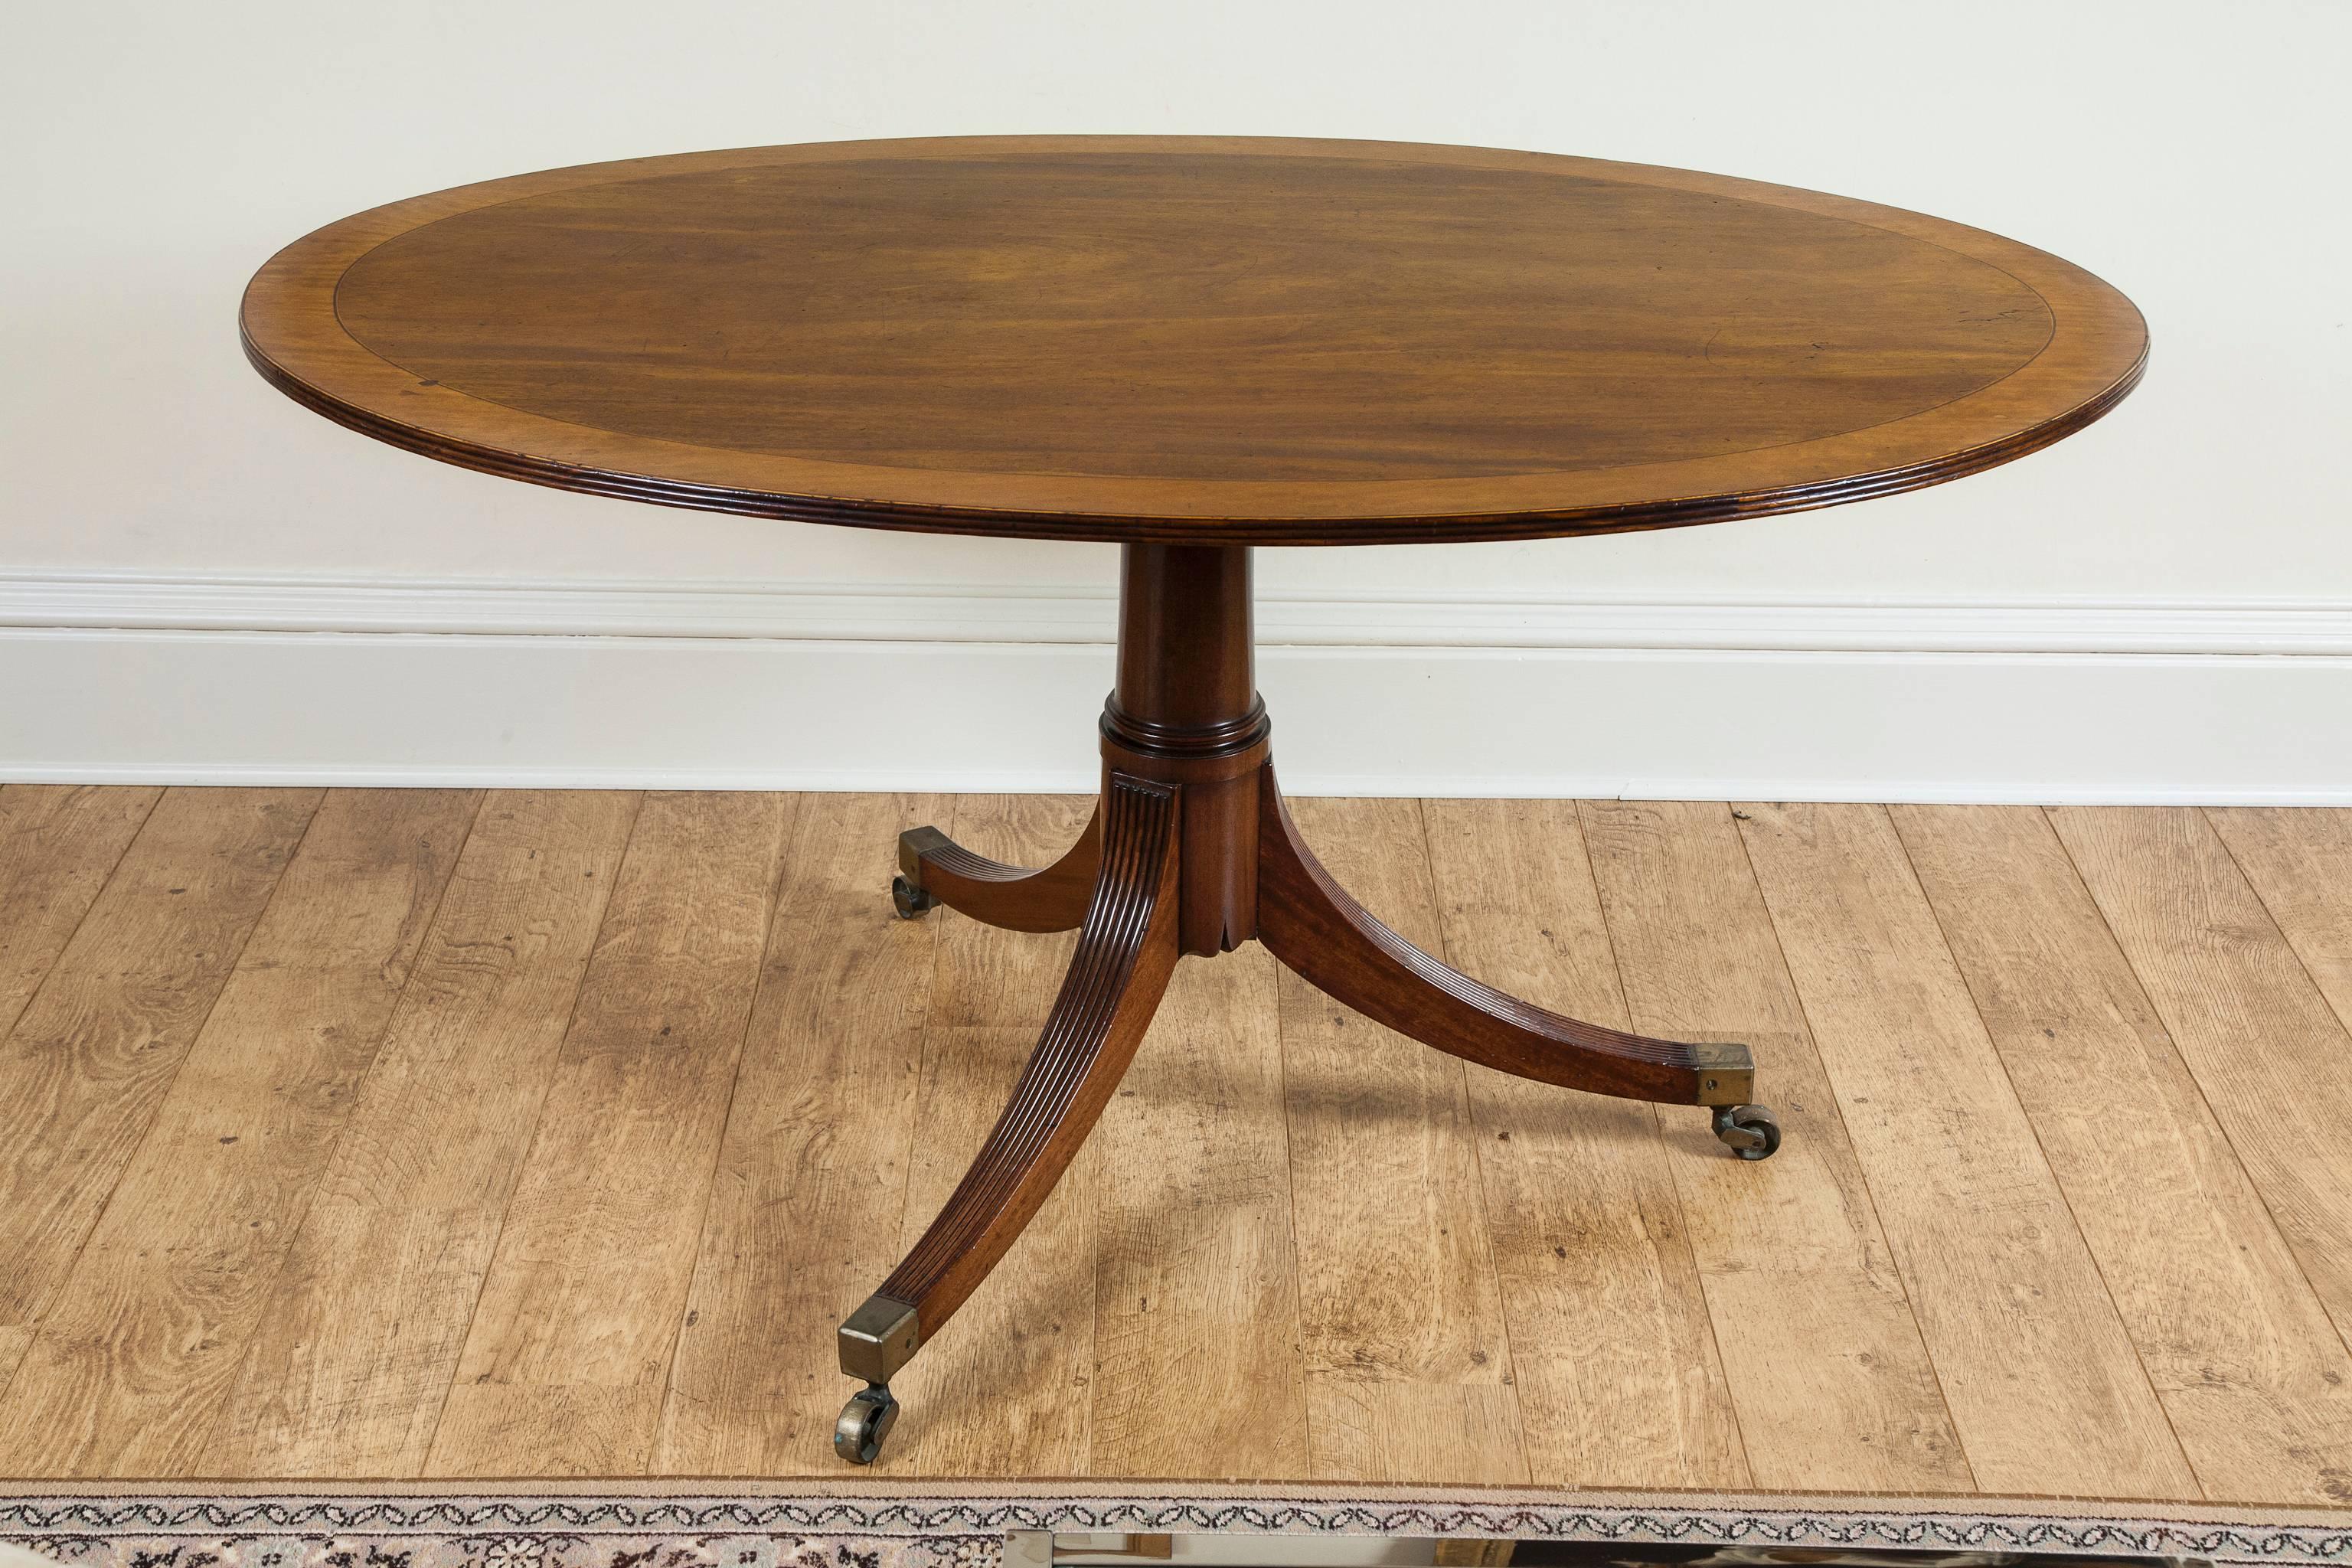 A handsome 18th century oval tilt top table with a triple reeded edge and satinwood cross banding, on a gun barrel stem and tripod base of reeded legs terminating in brass castors.
It is an exceptional table and the finest example. 
Of particular